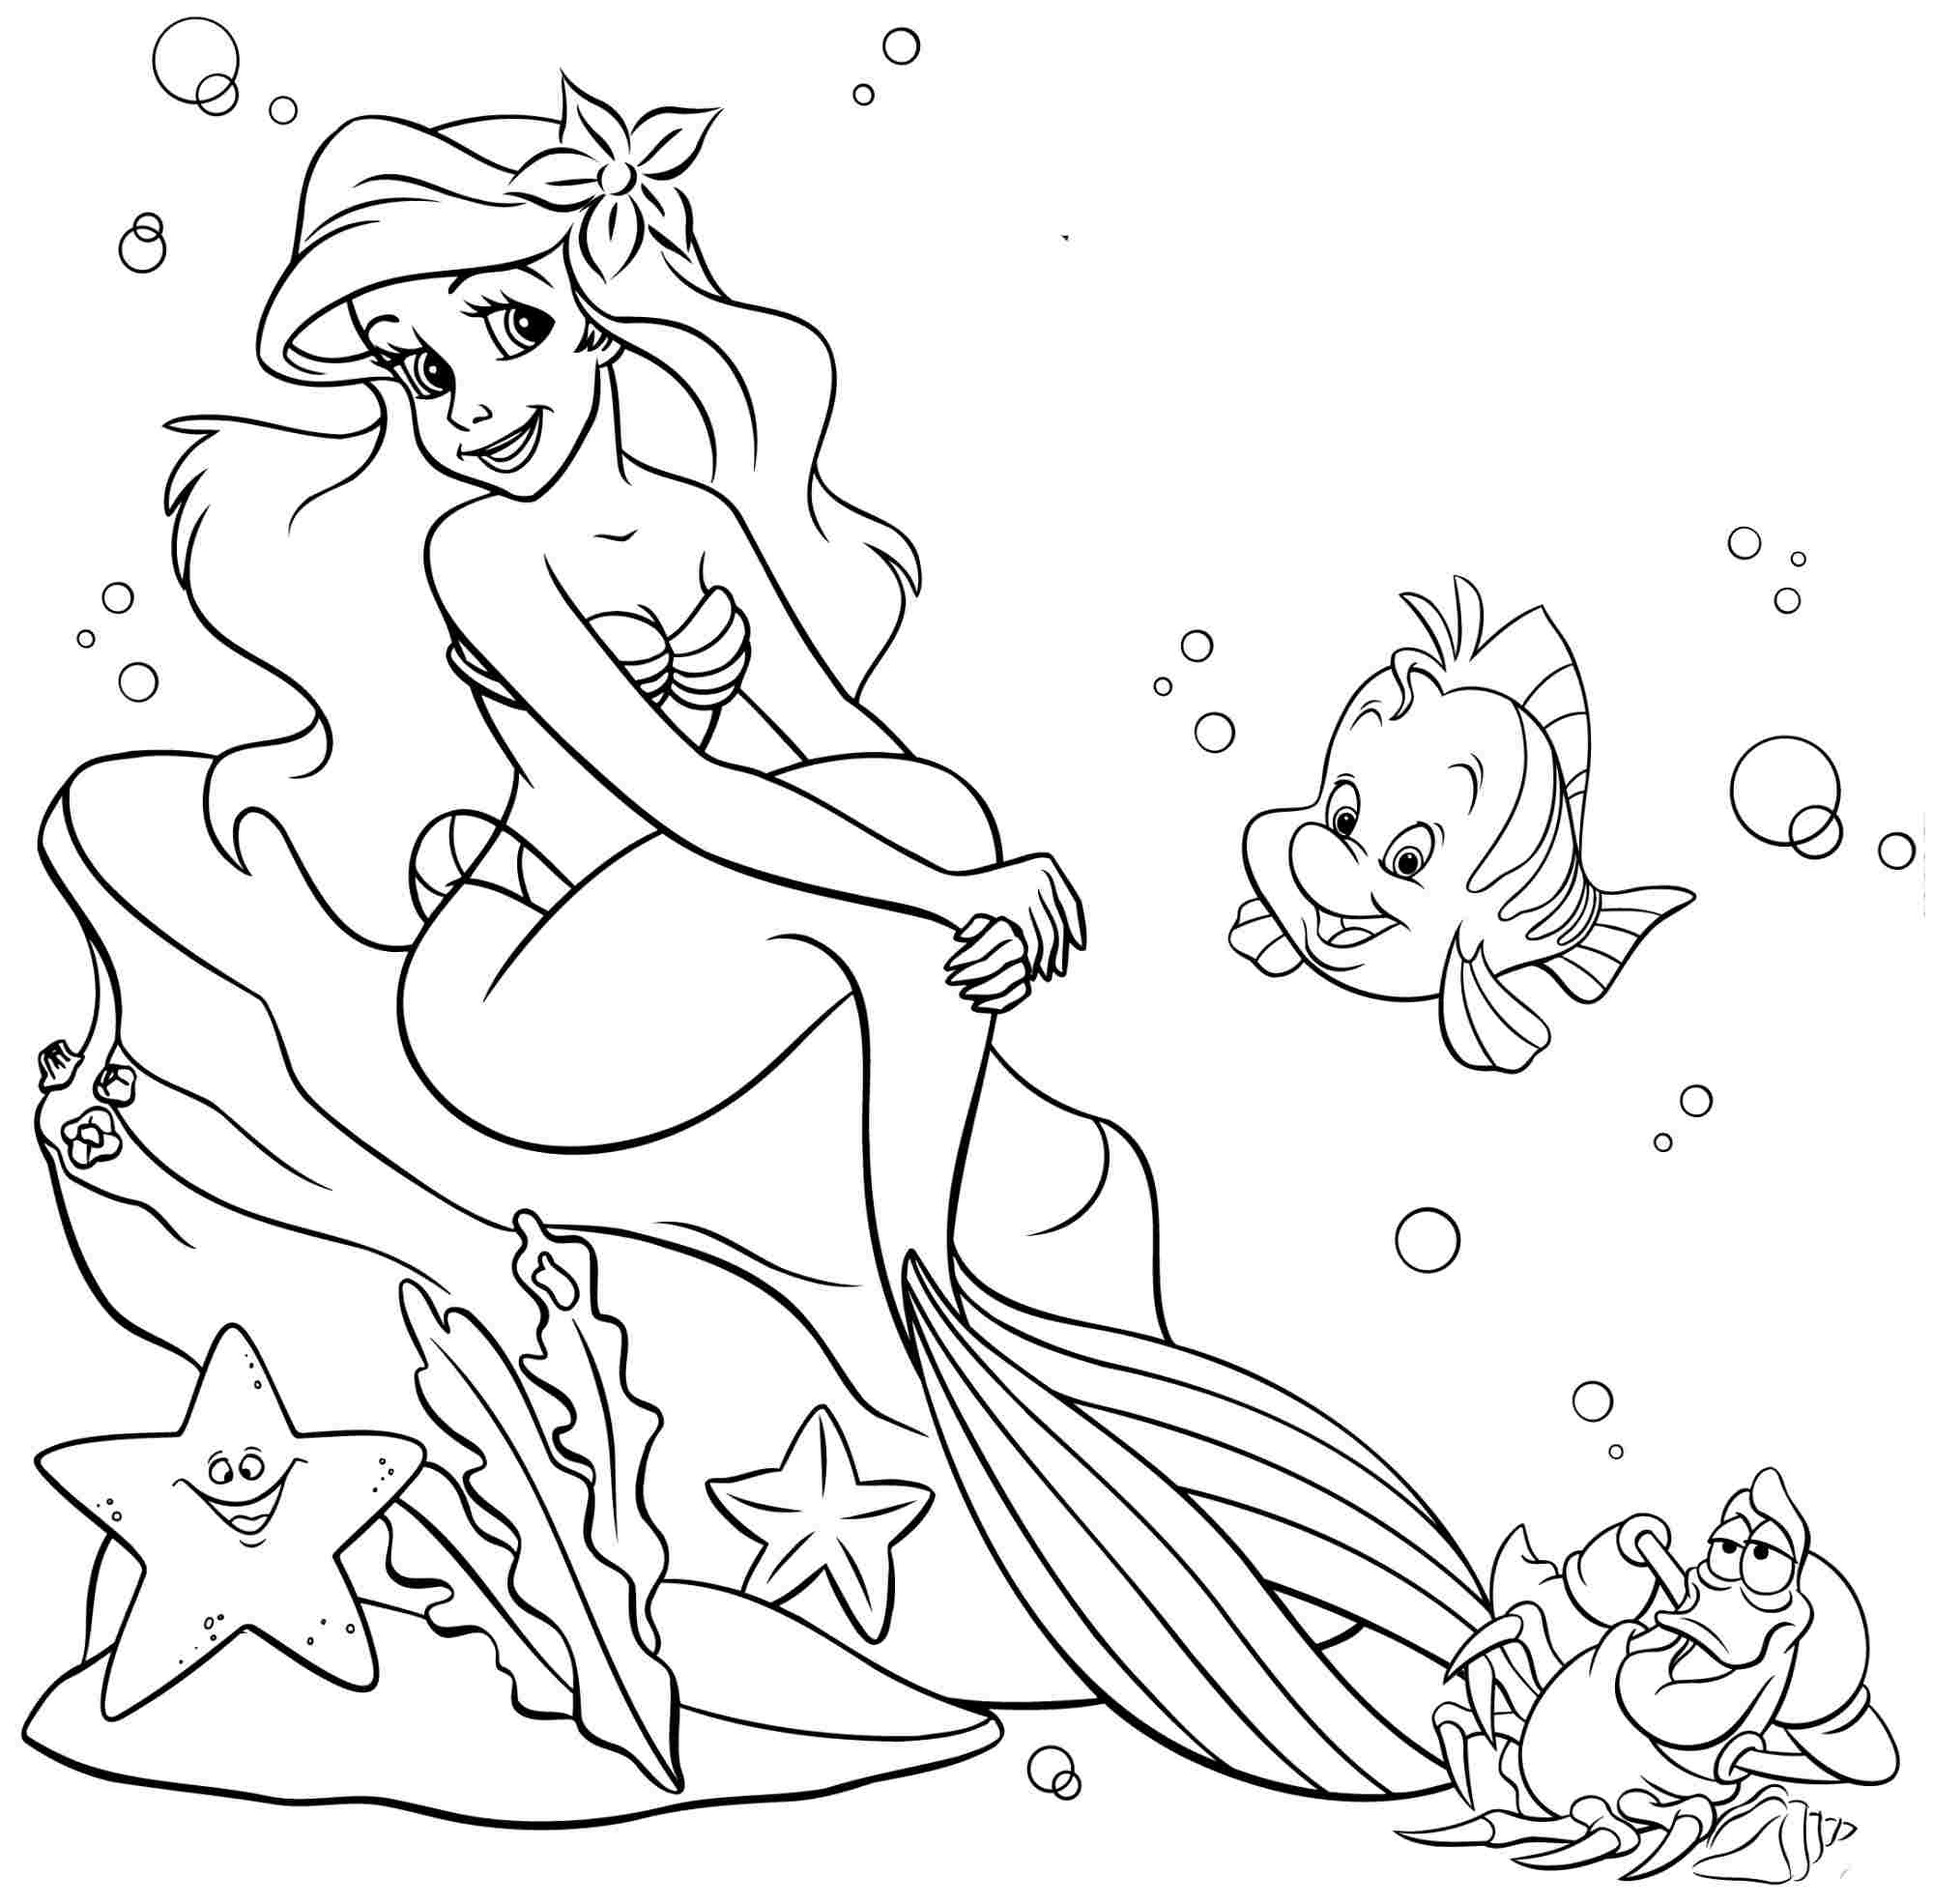 The little mermaid coloring pages to download and print